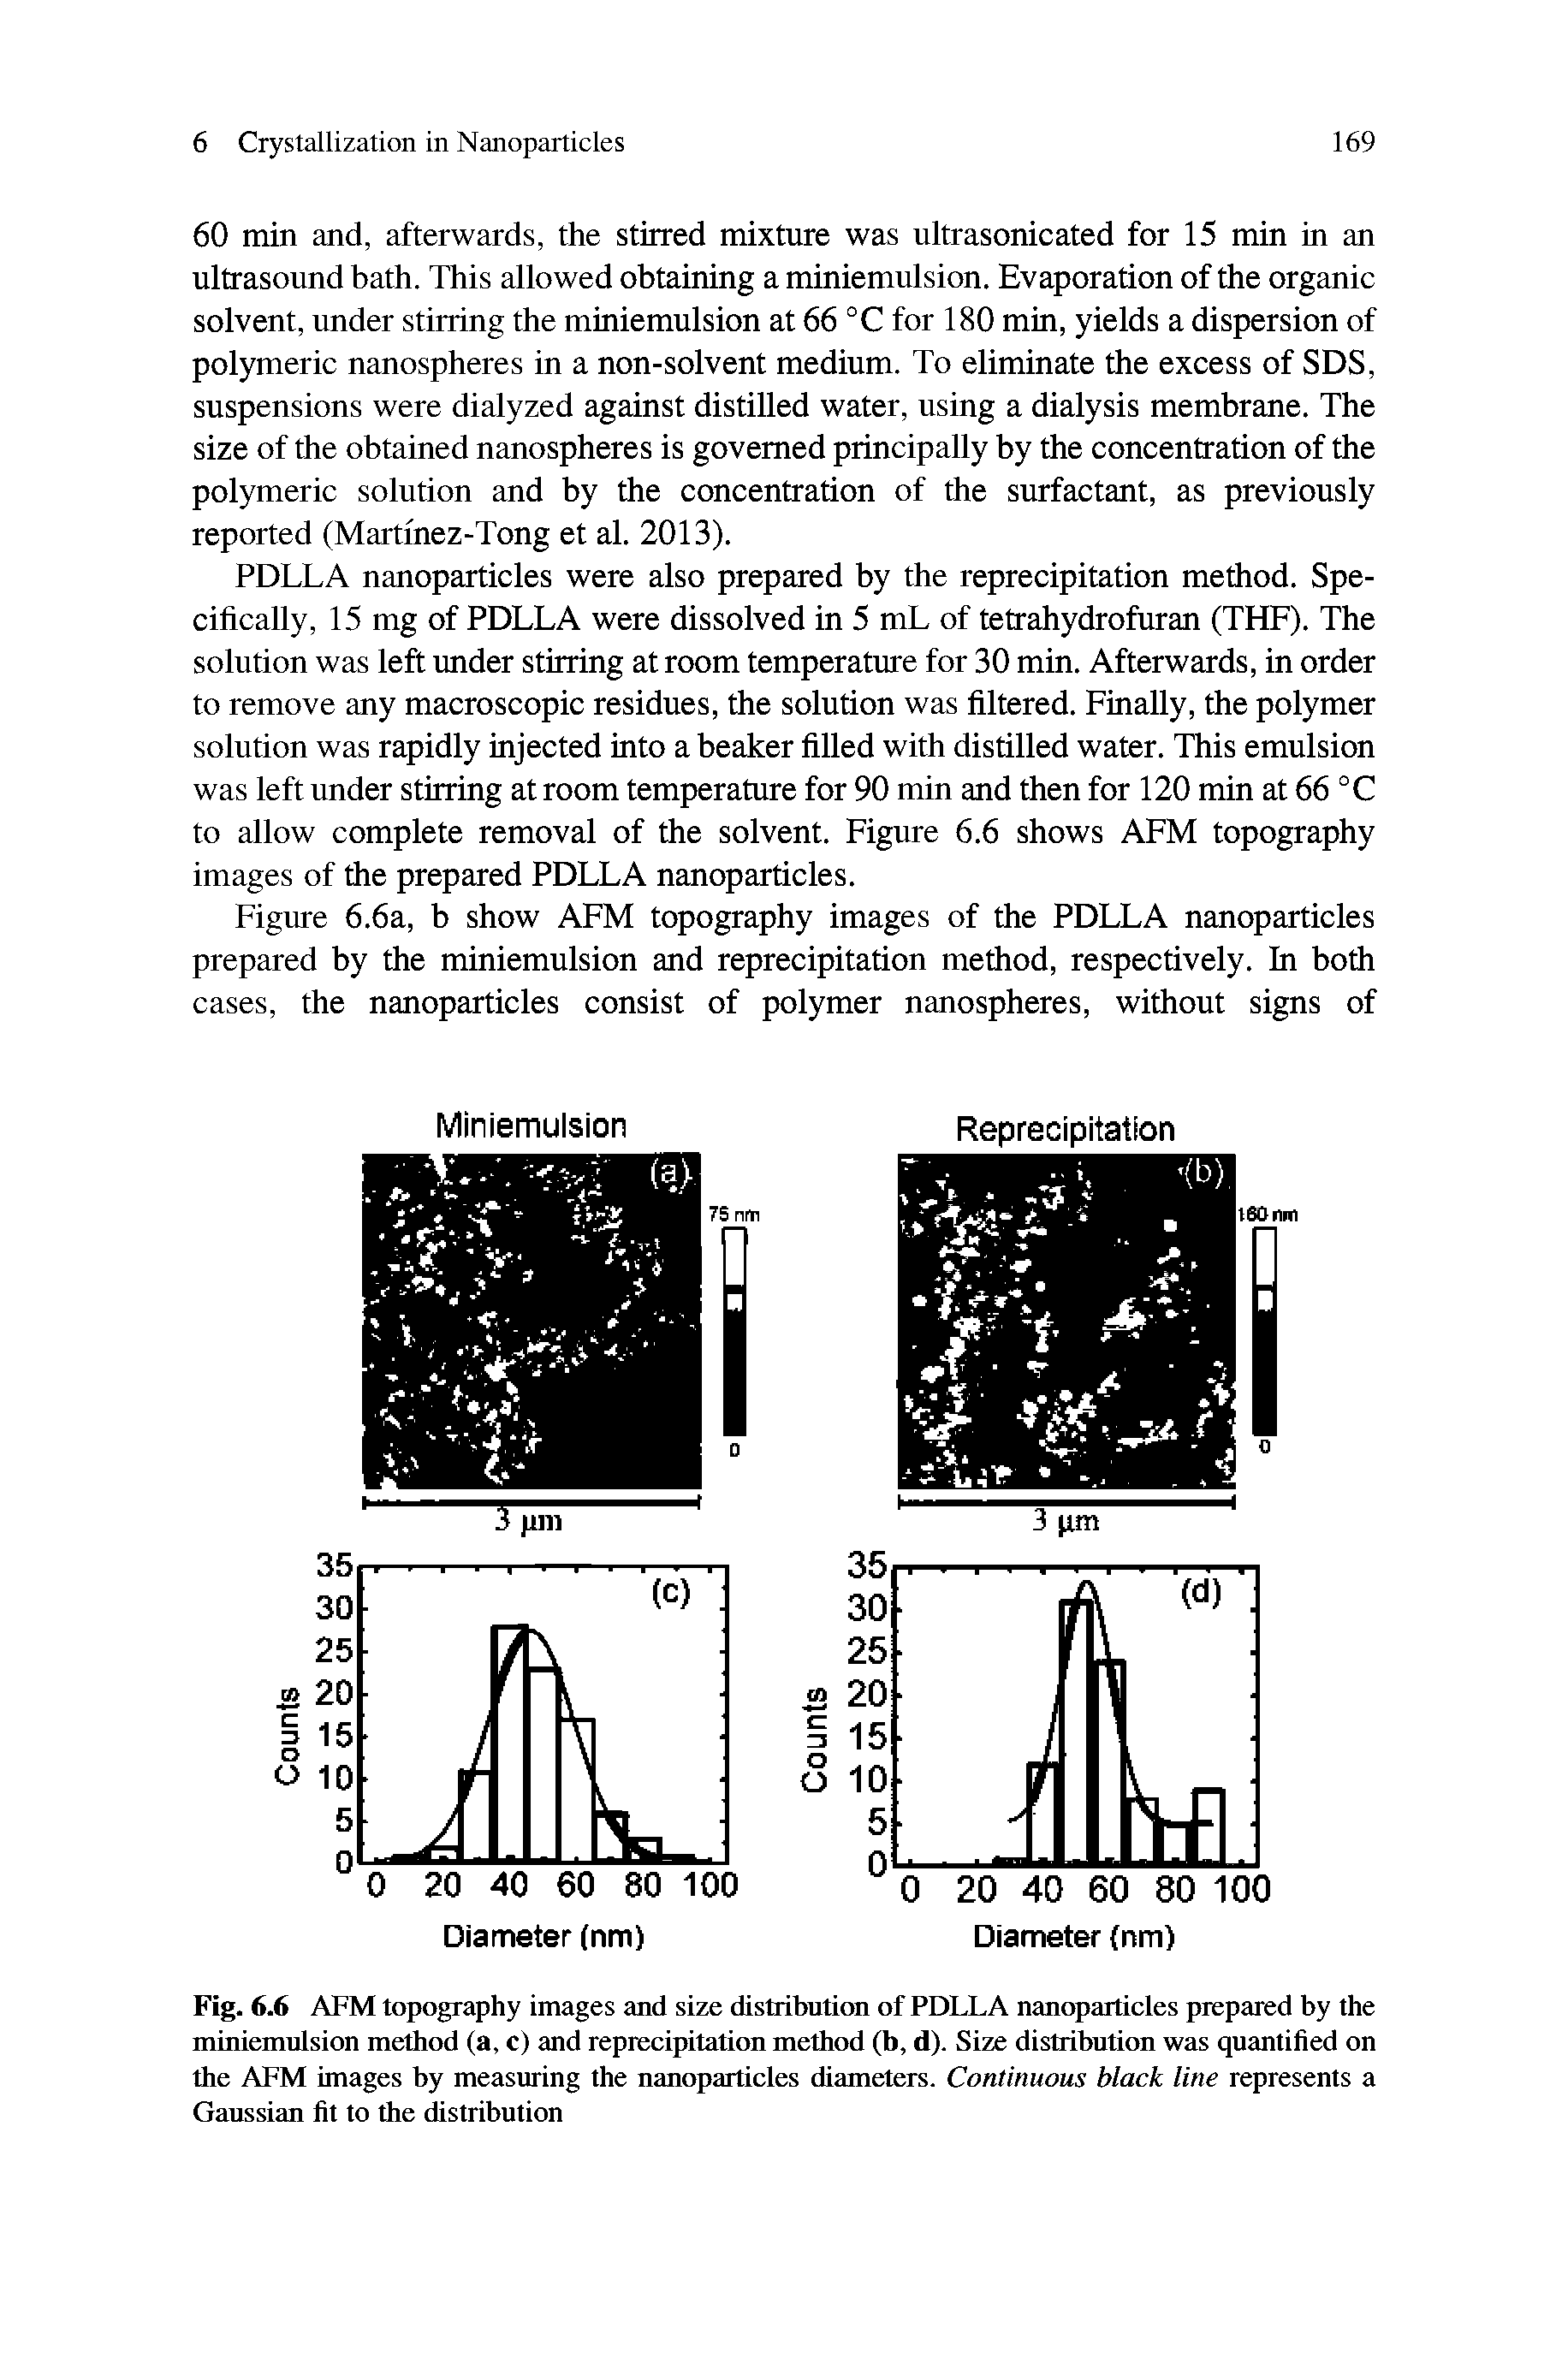 Fig. 6.6 AFM topography images and size distribution of PDLLA nanoparticles prepared by the miniemulsion method (a, c) and reprecipitation method (b, d). Size distribution was quantified on the AFM images by measuring the nanoparticles diameters. Continuous black line represents a Gaussian fit to the distribution...